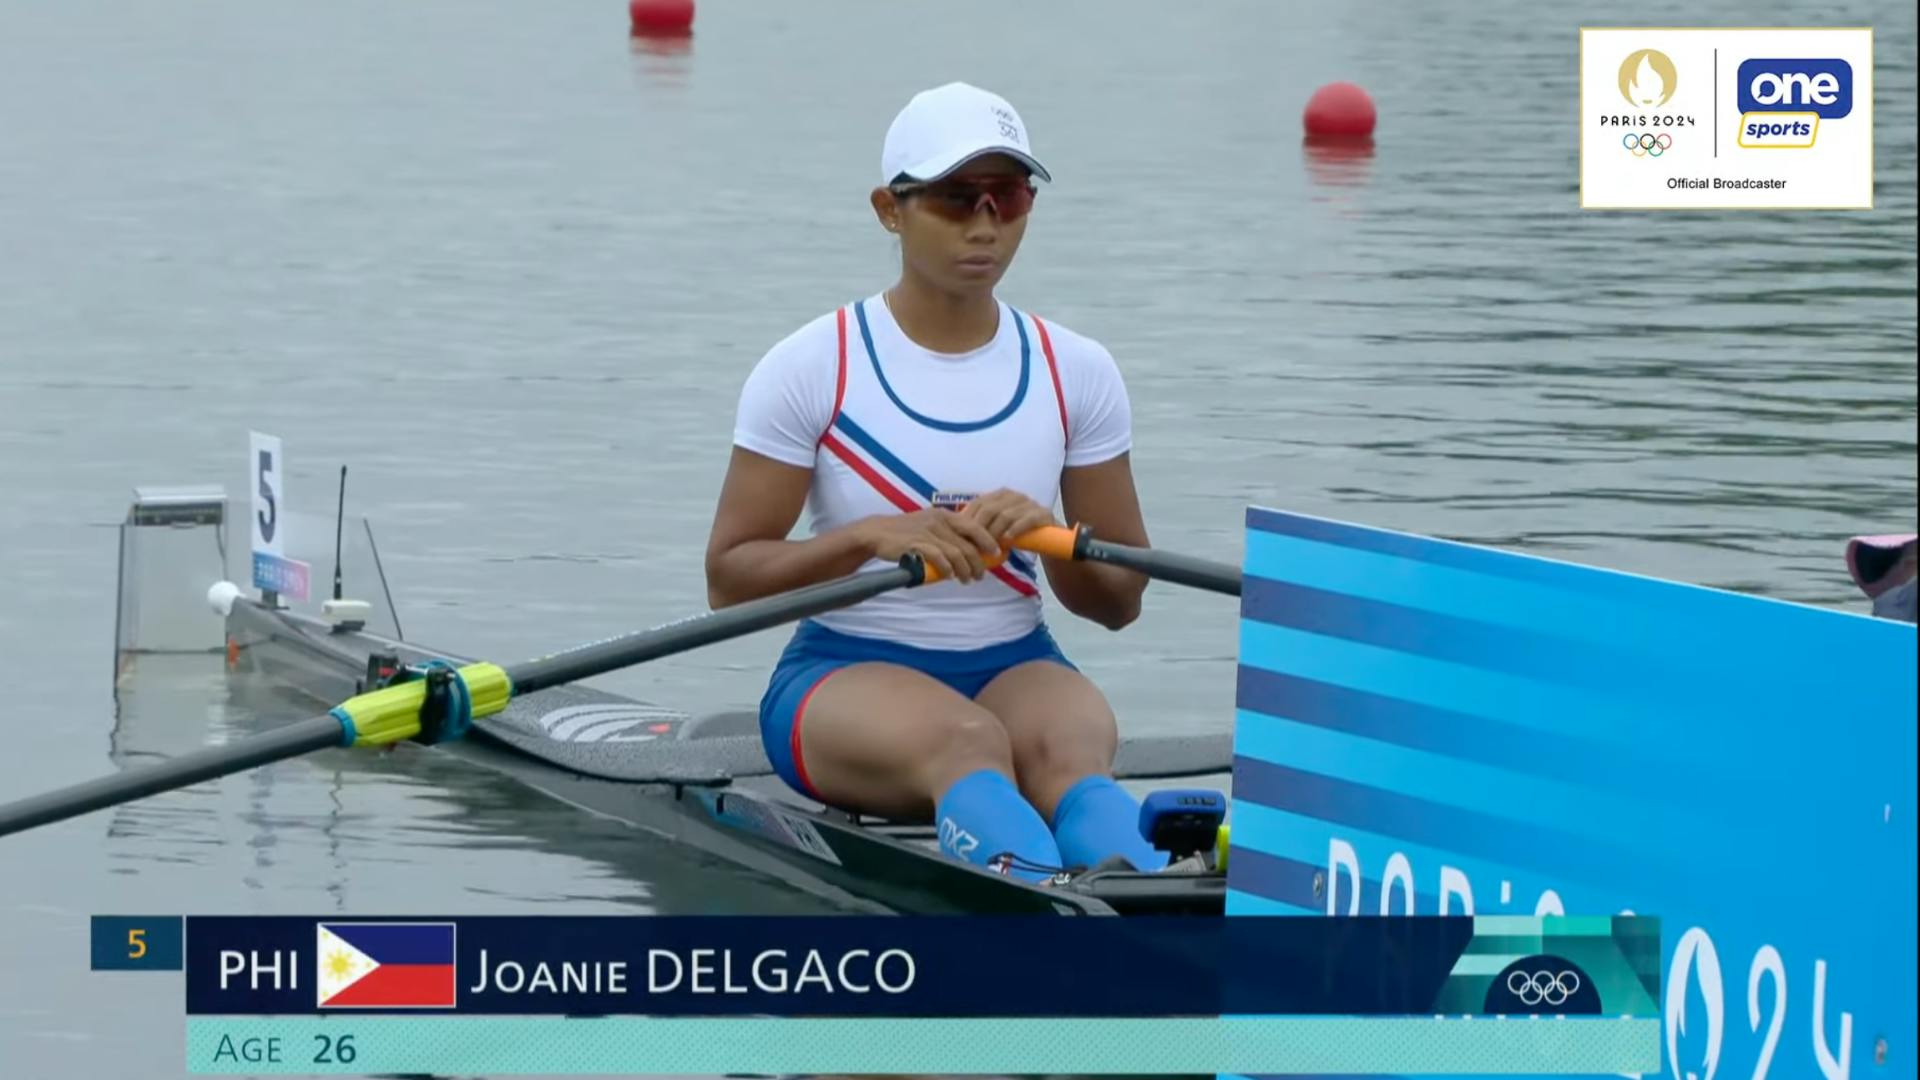 Paris 2024: Joanie Delgaco starts strong, but relegated to repechage after finishing 4th in women